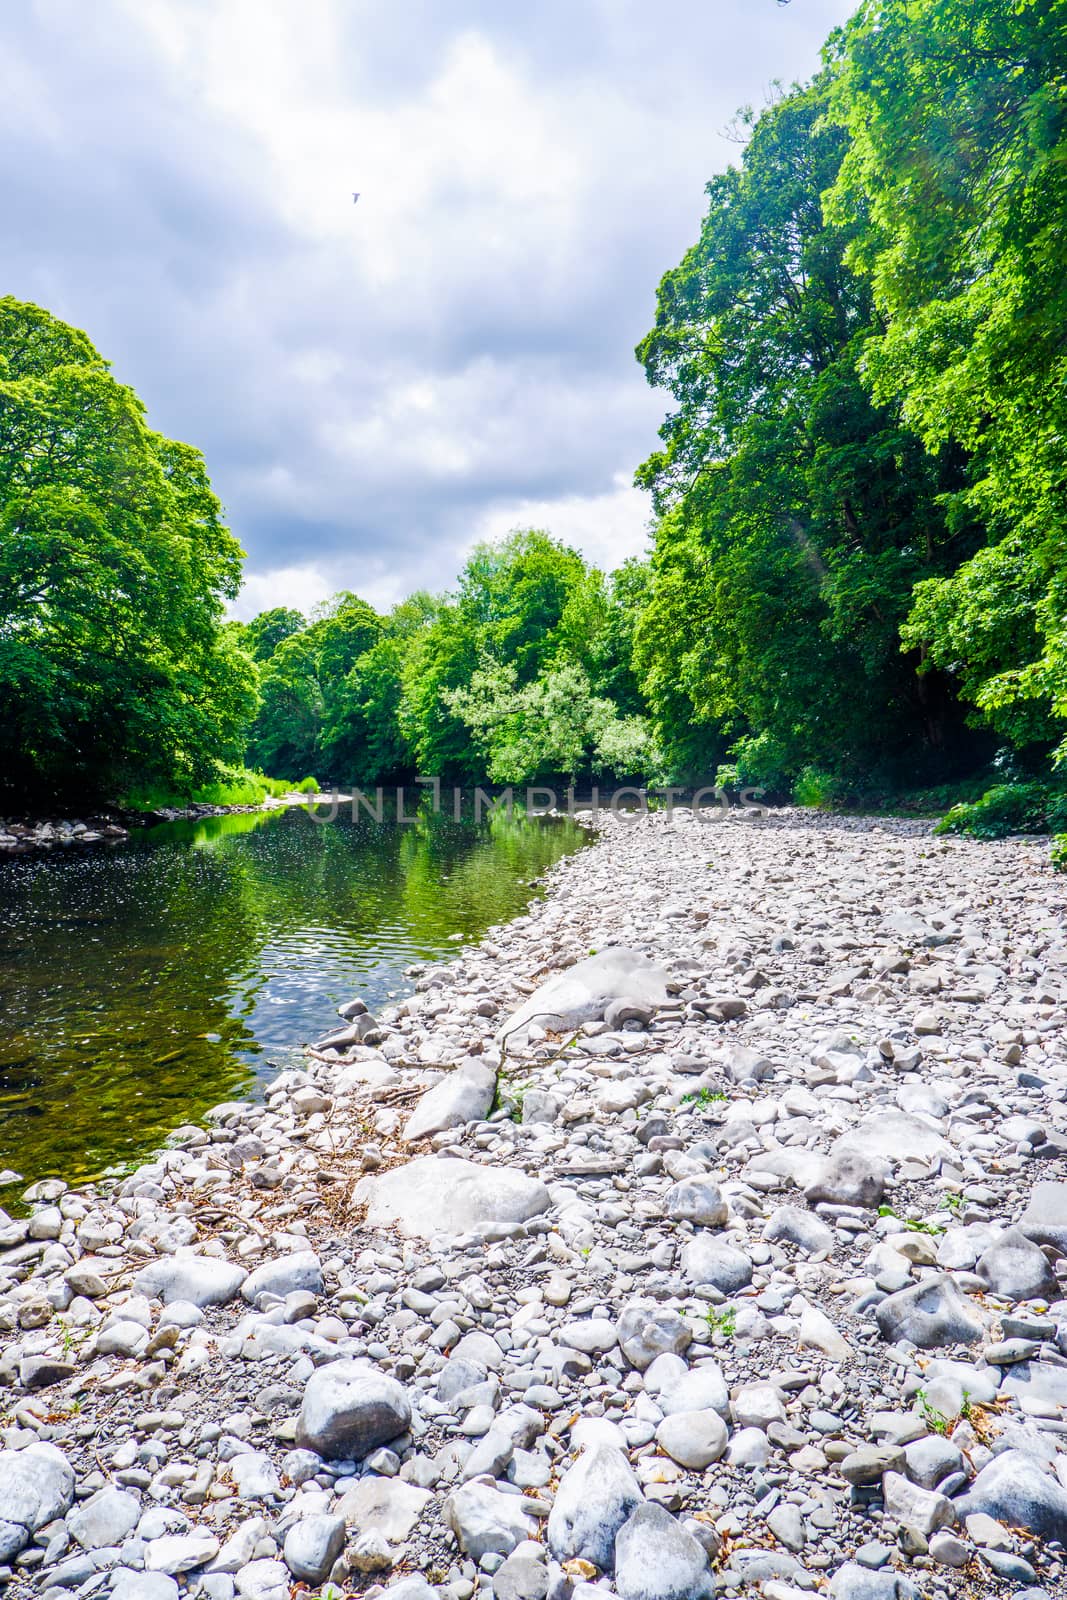 River Kent running over the rocks and pebbles with tree lined banks in summer